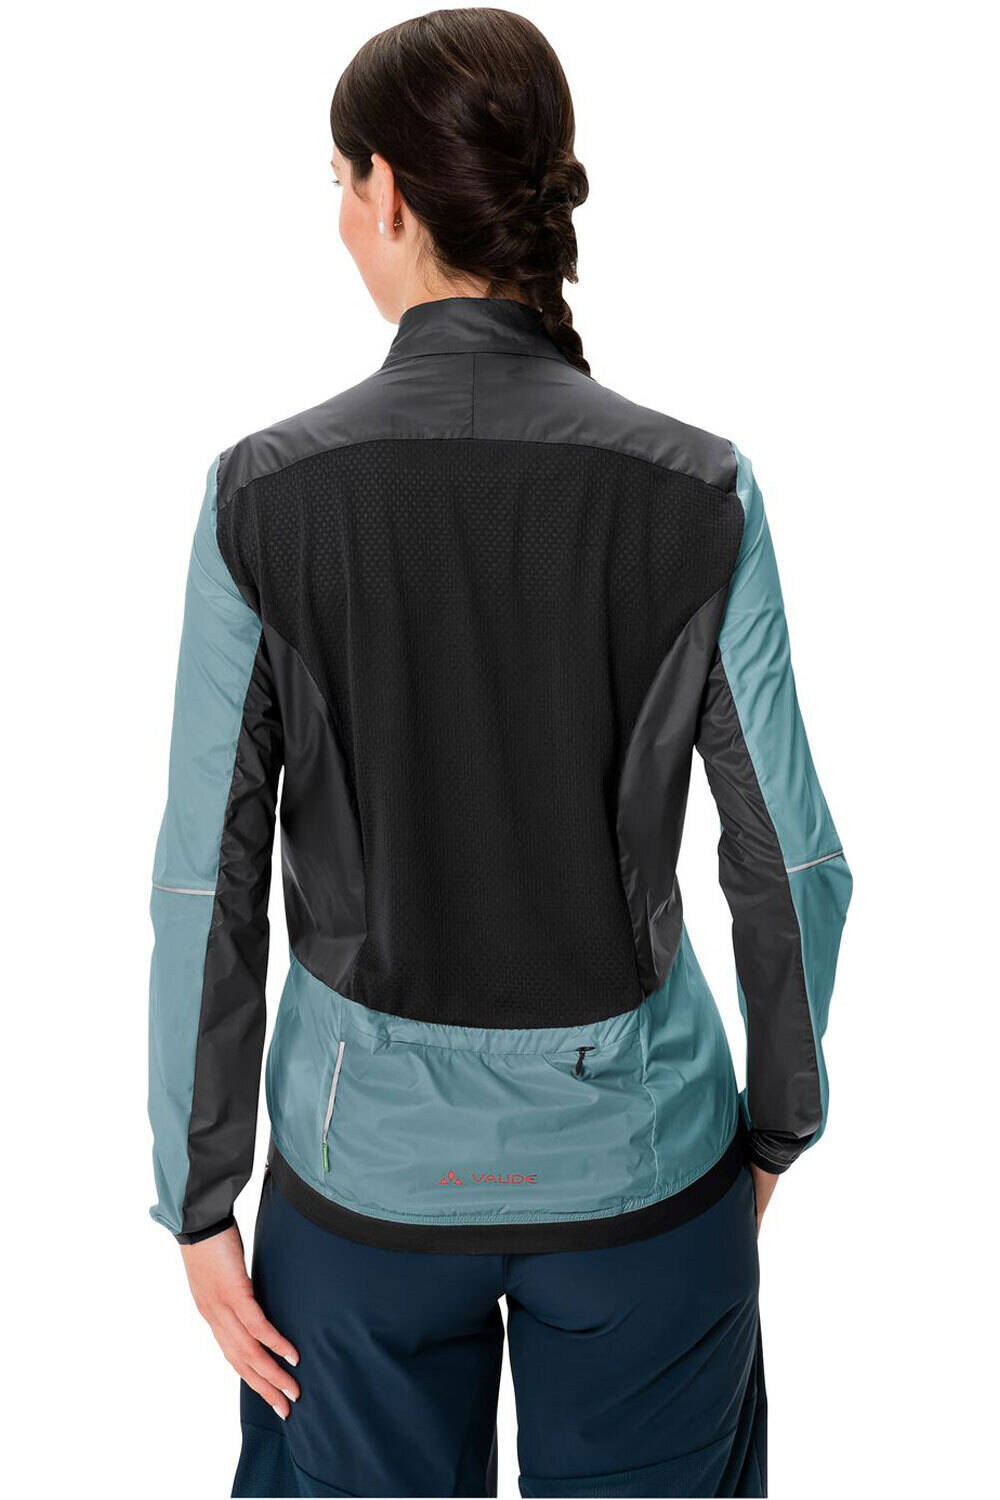 Vaude chaqueta impermeable ciclismo mujer Women's Air Pro Jacket vista trasera